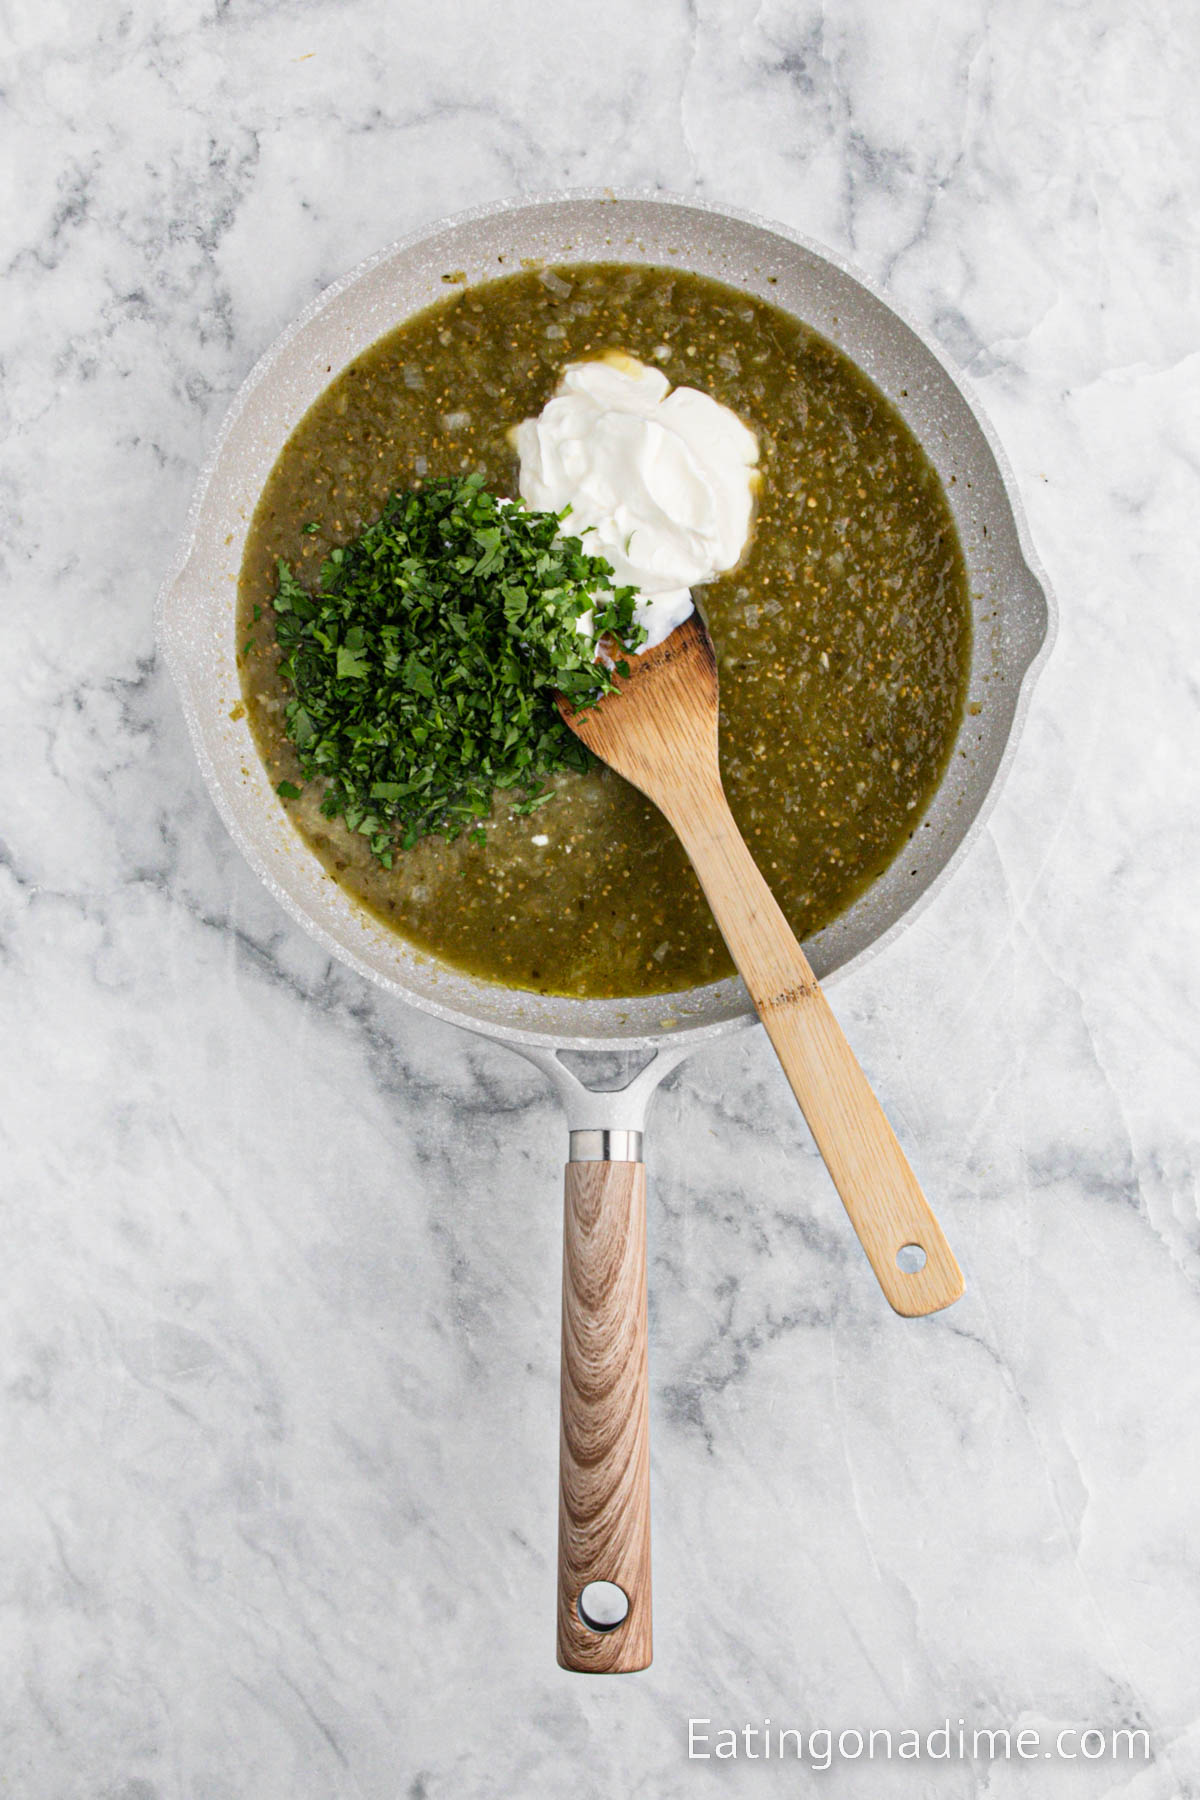 Heating the salsa, sour cream and cilantro in a skillet